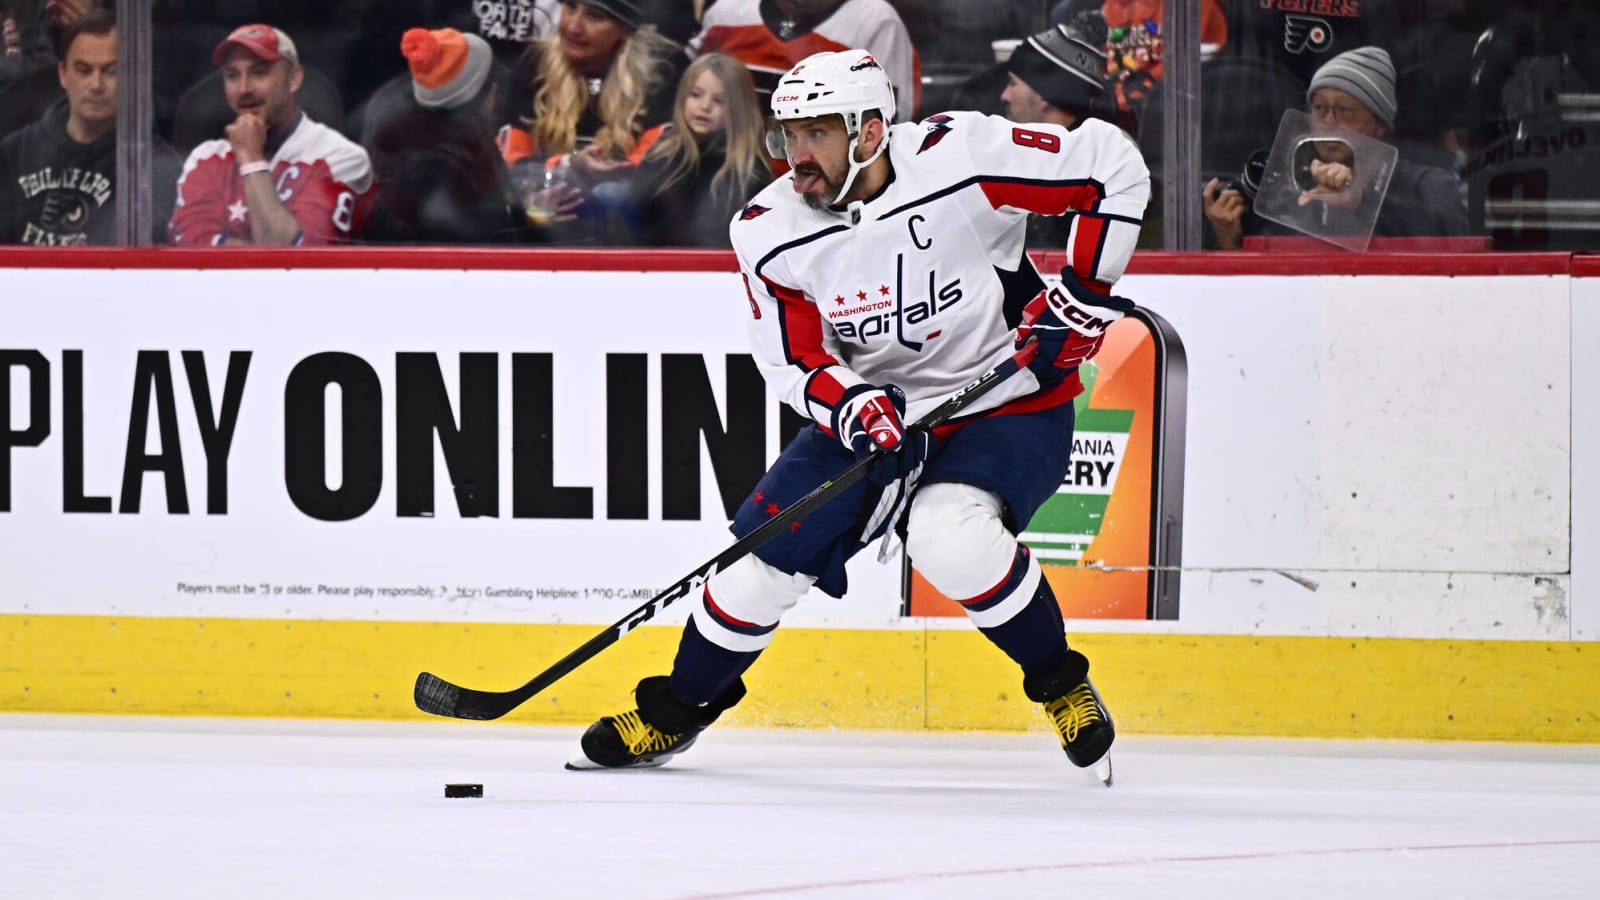 Alex Ovechkin’s unprecedented 11-game goal drought sparks NHL legacy concerns, but Bruce Boudreau’s confidence on captain offers glimmer of resilience